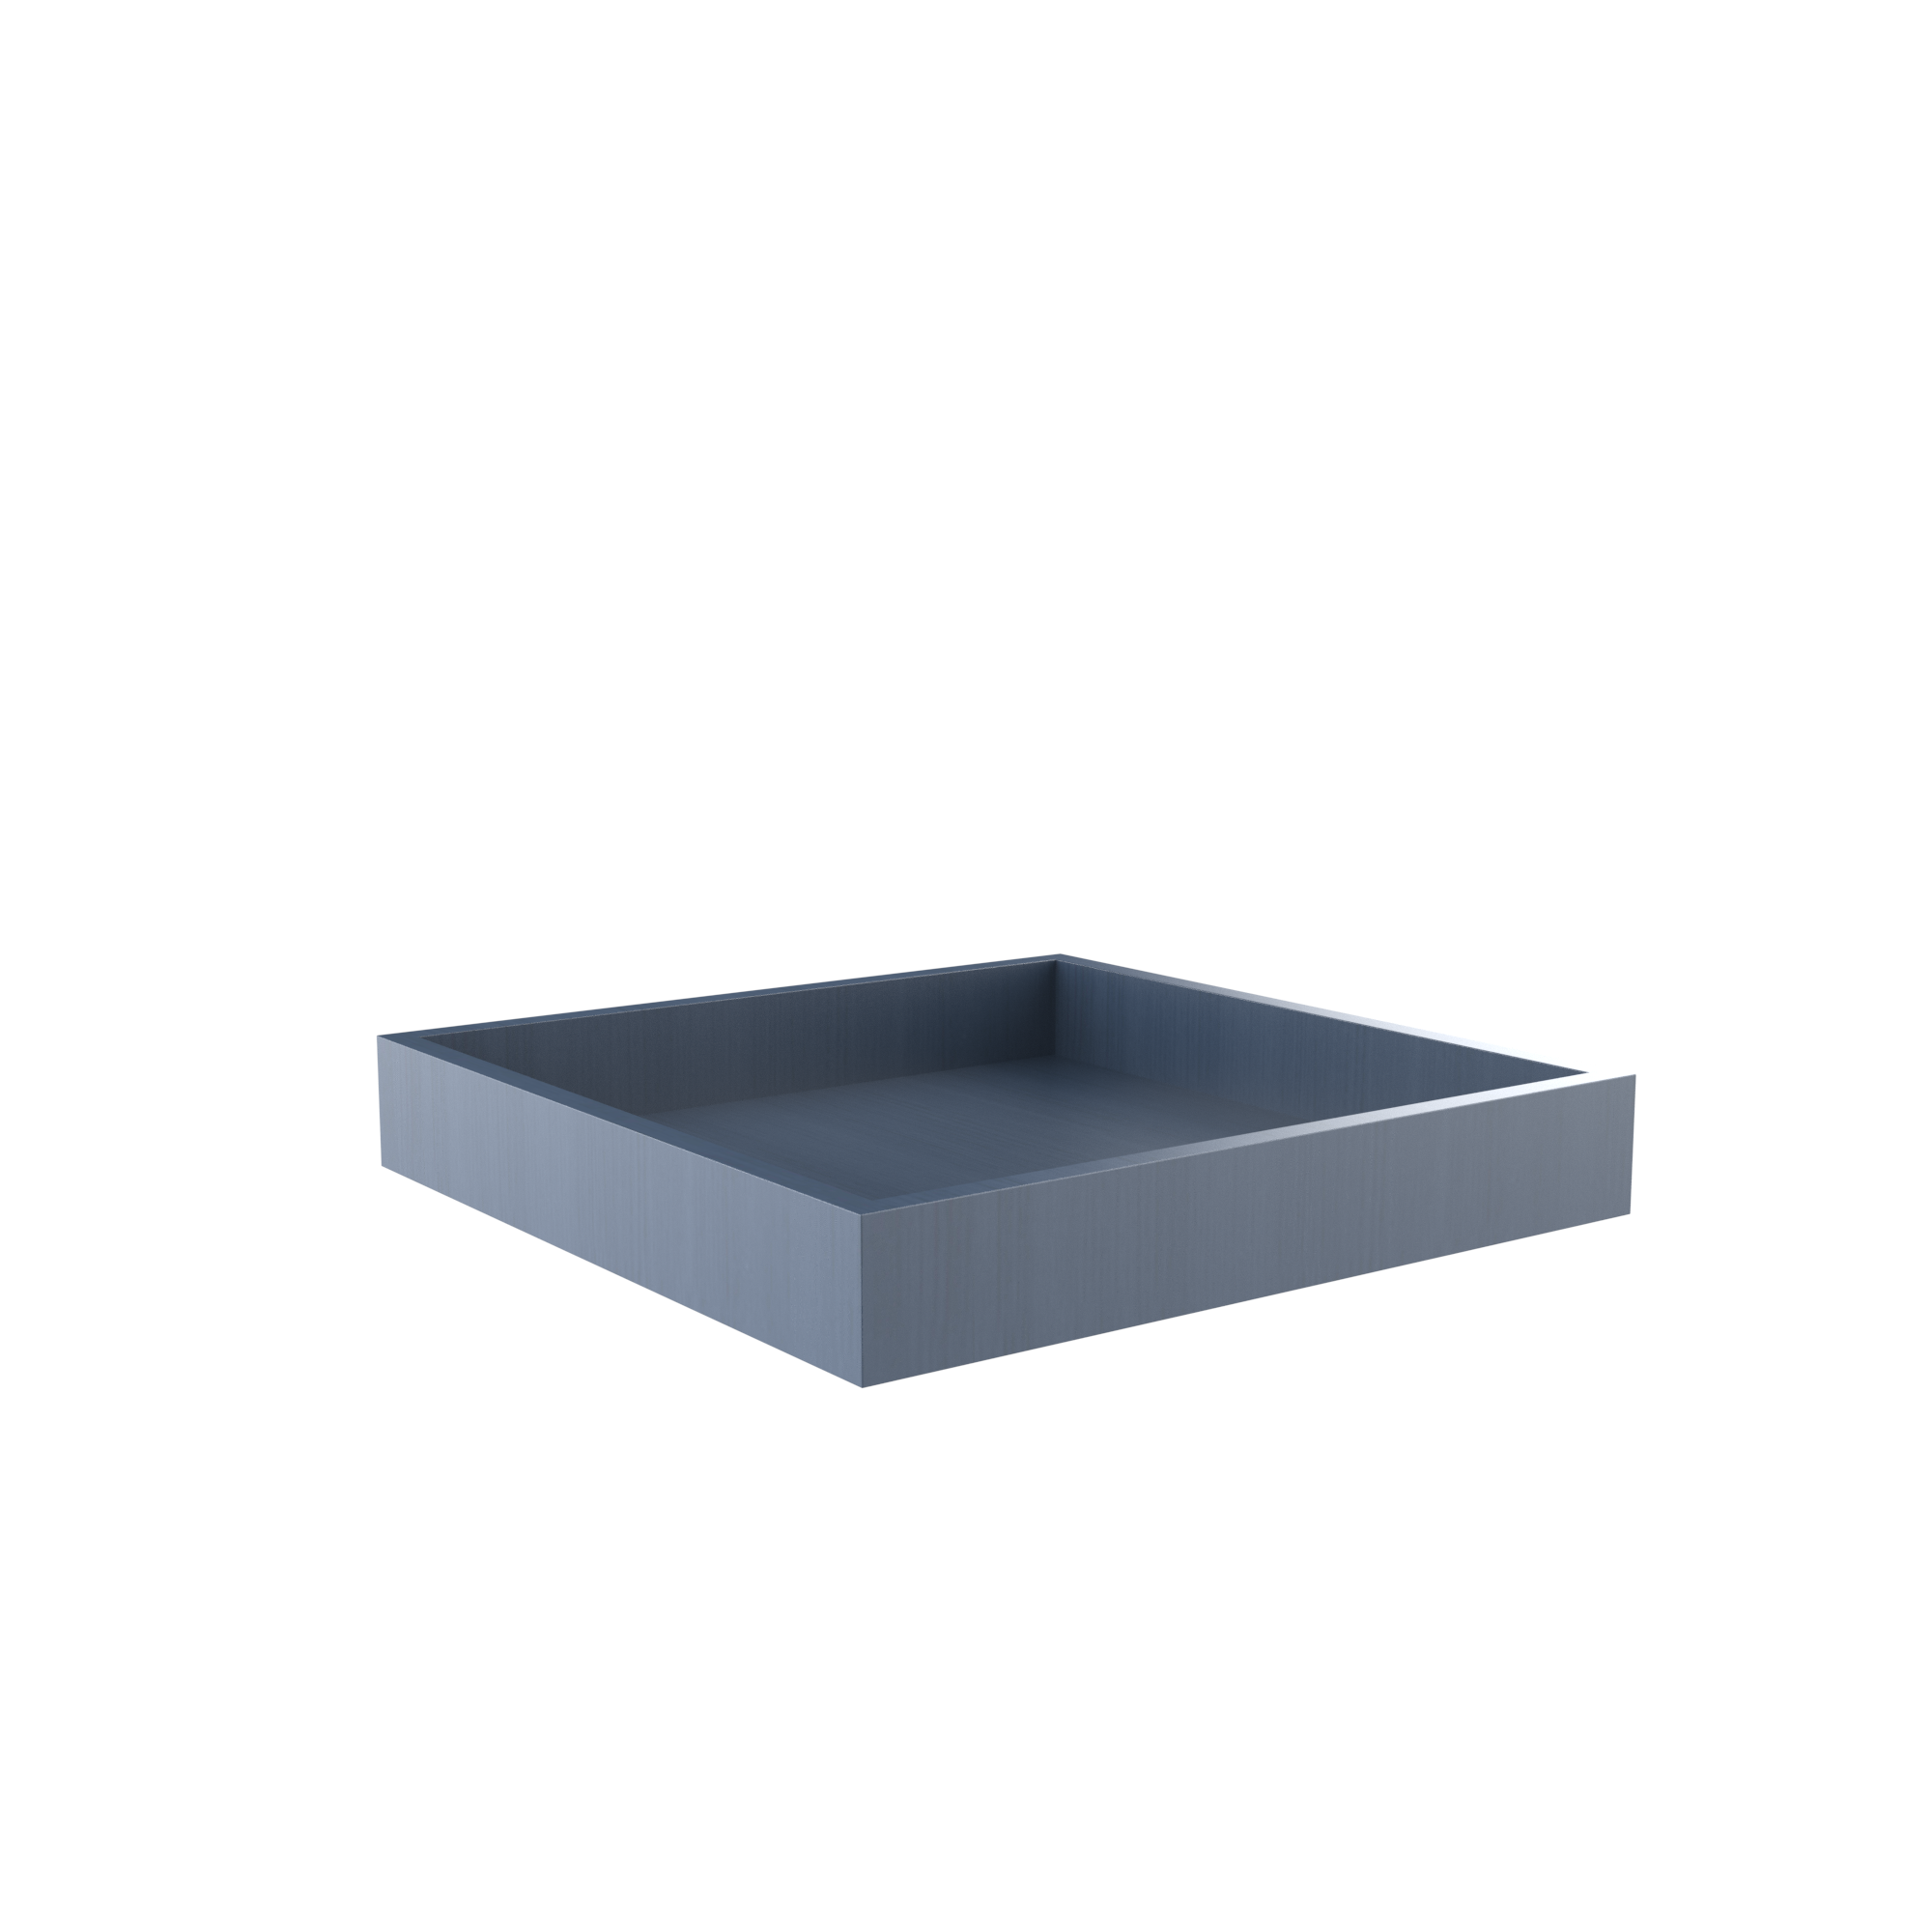 Roll Out Tray for Cabinets - Fits B21 - Blue Shaker Cabinet Cabinet - RTA